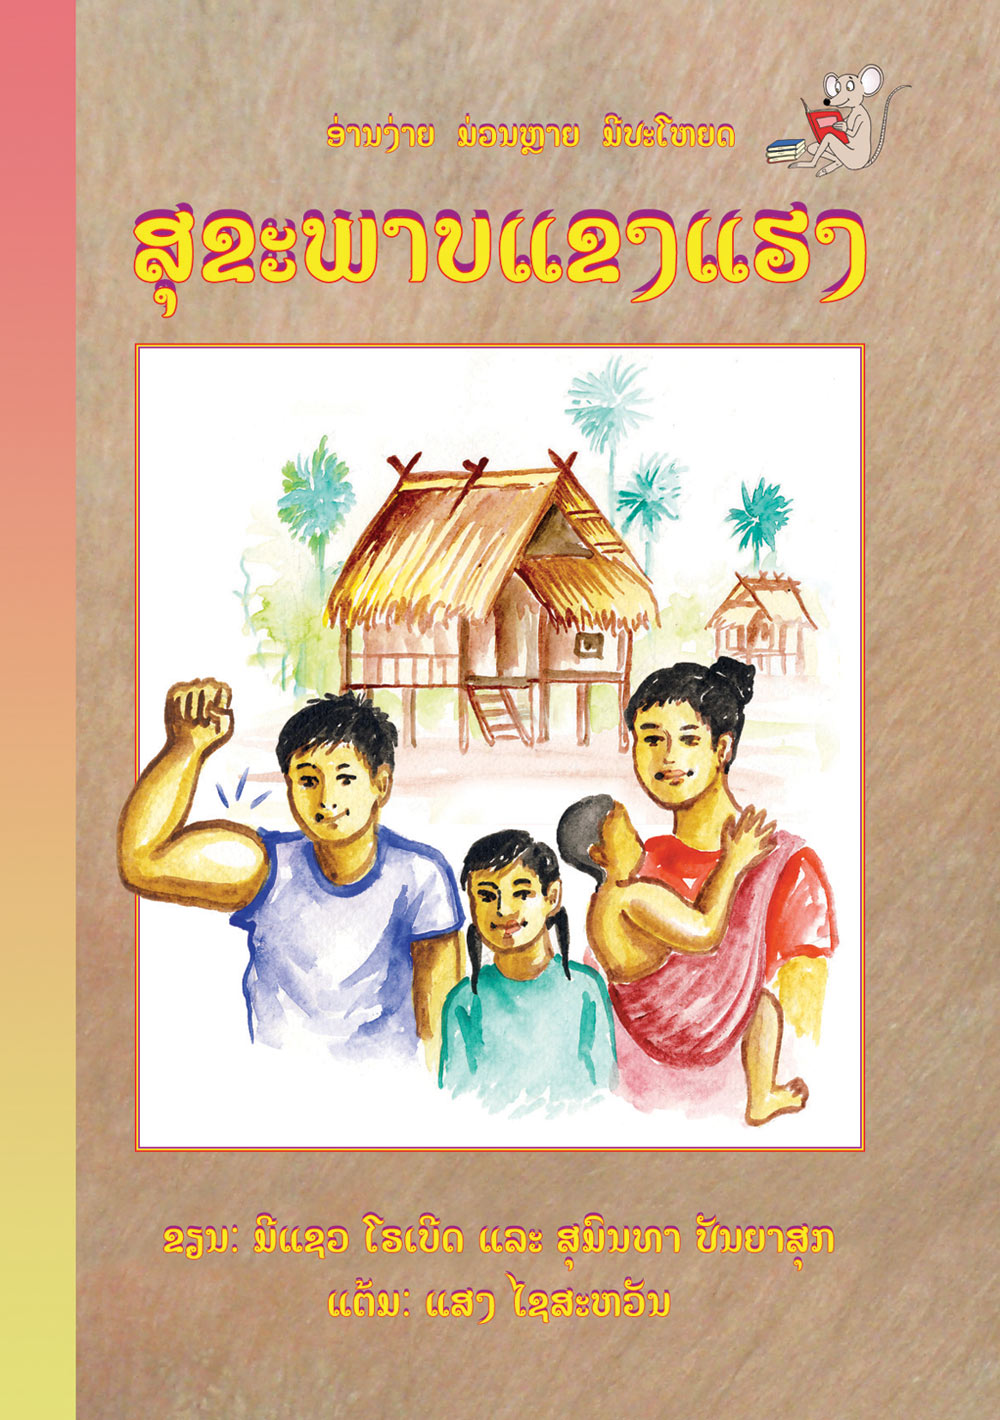 Protecting Yourself from Germs large book cover, published in Lao language